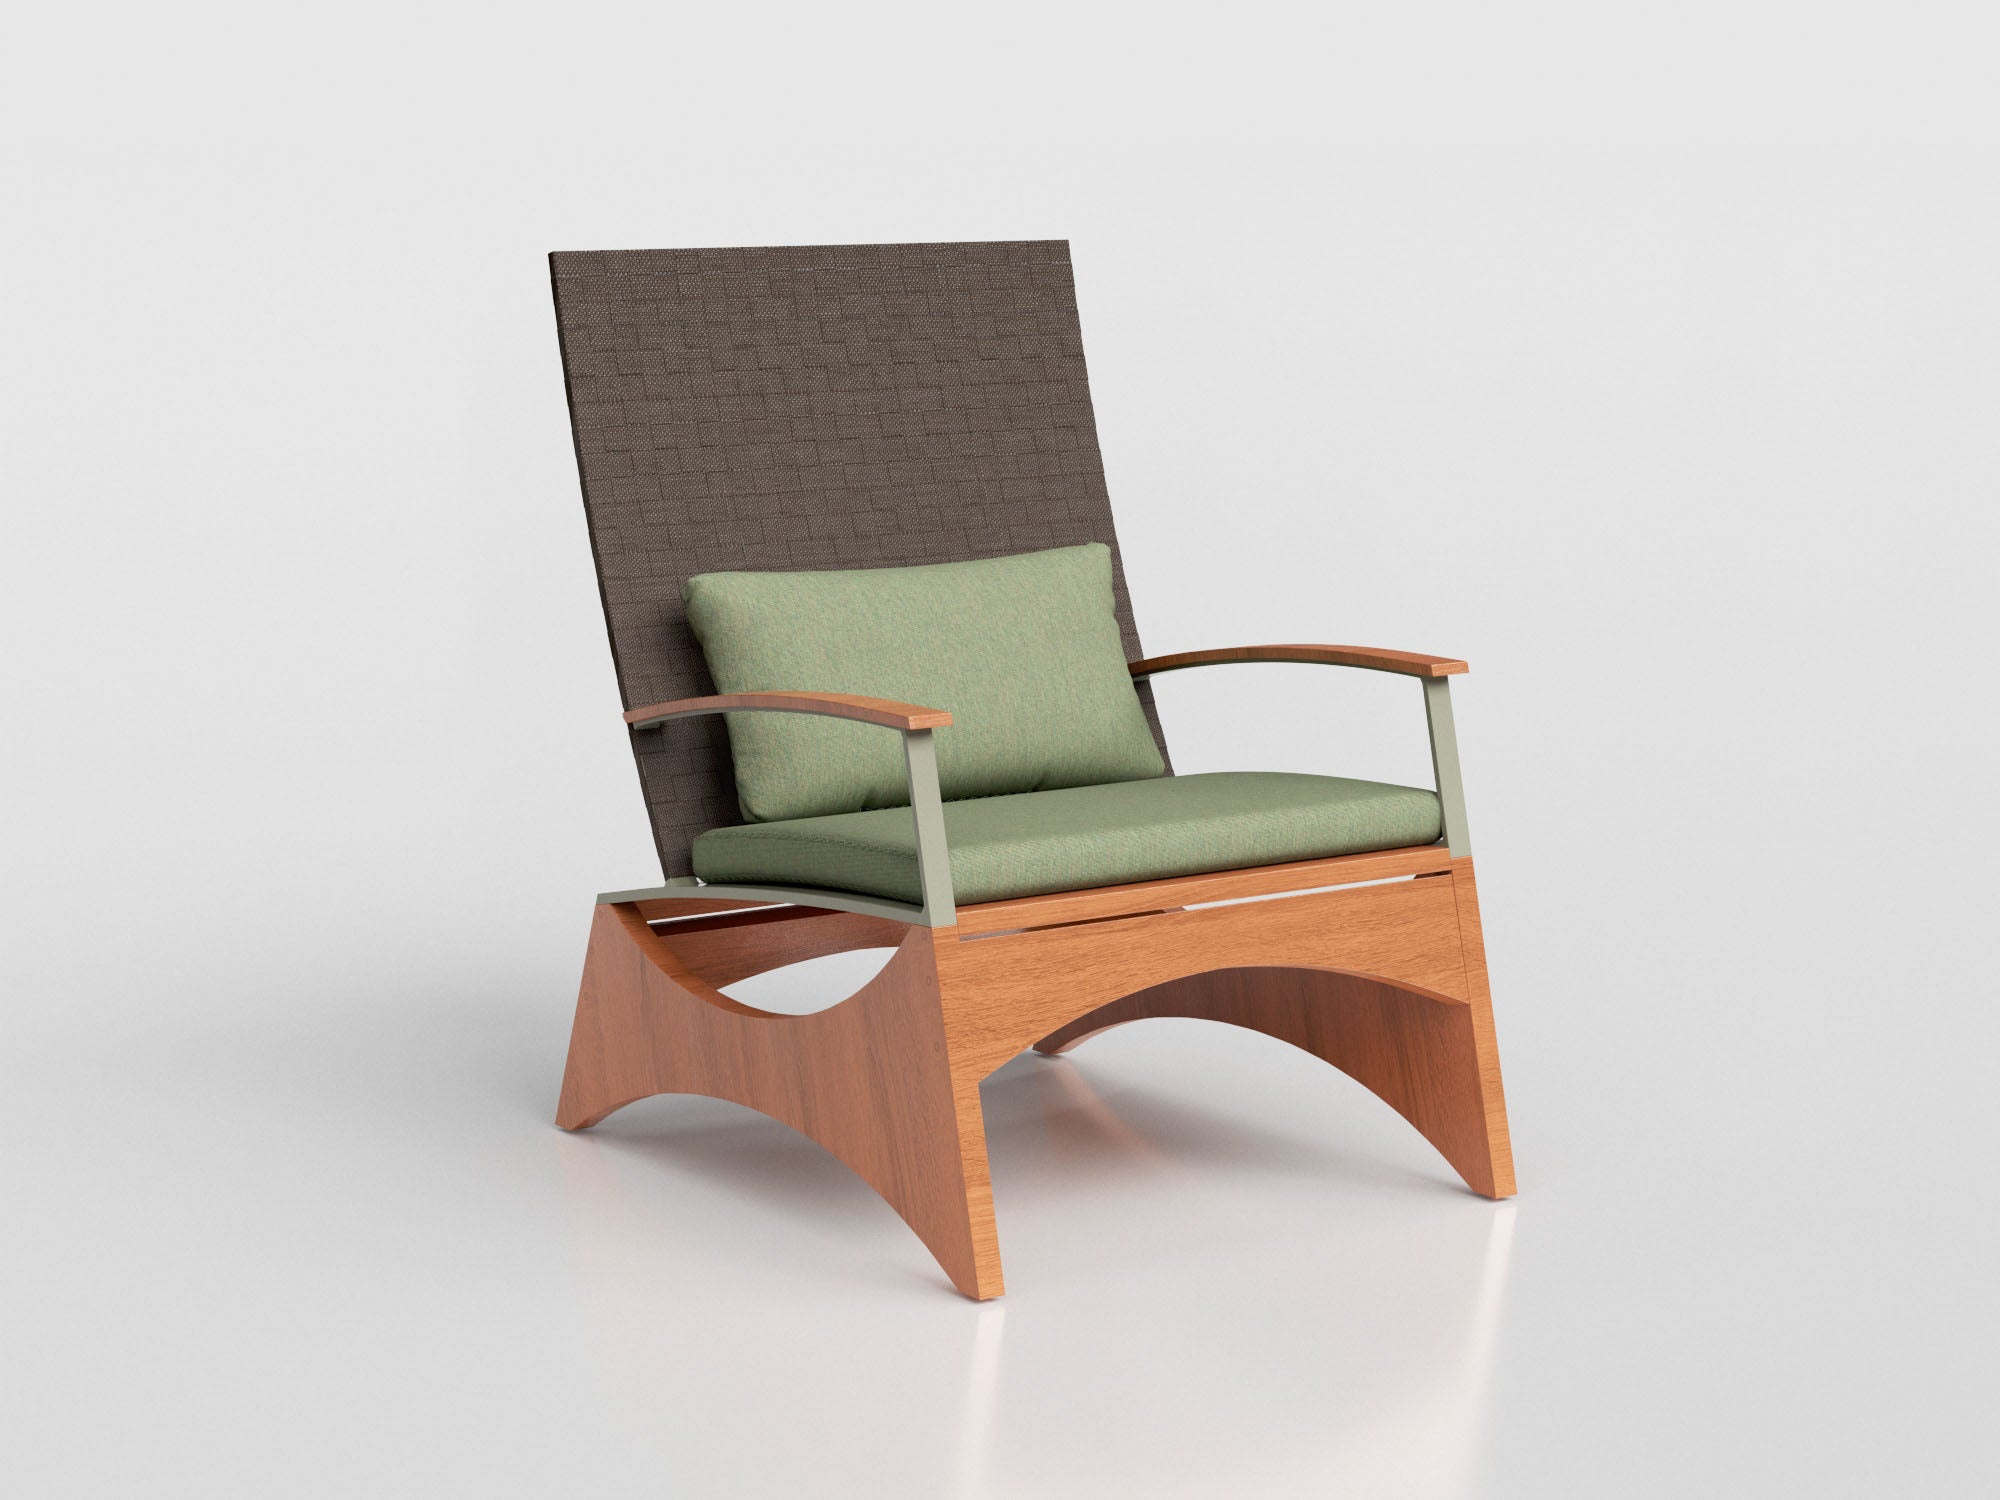 Iaia Lounge Chair Standard with aluminum and wood estruture, waven in sling finishing, includes seat and back cushions upholstery, designed by Manuel Bandeira.